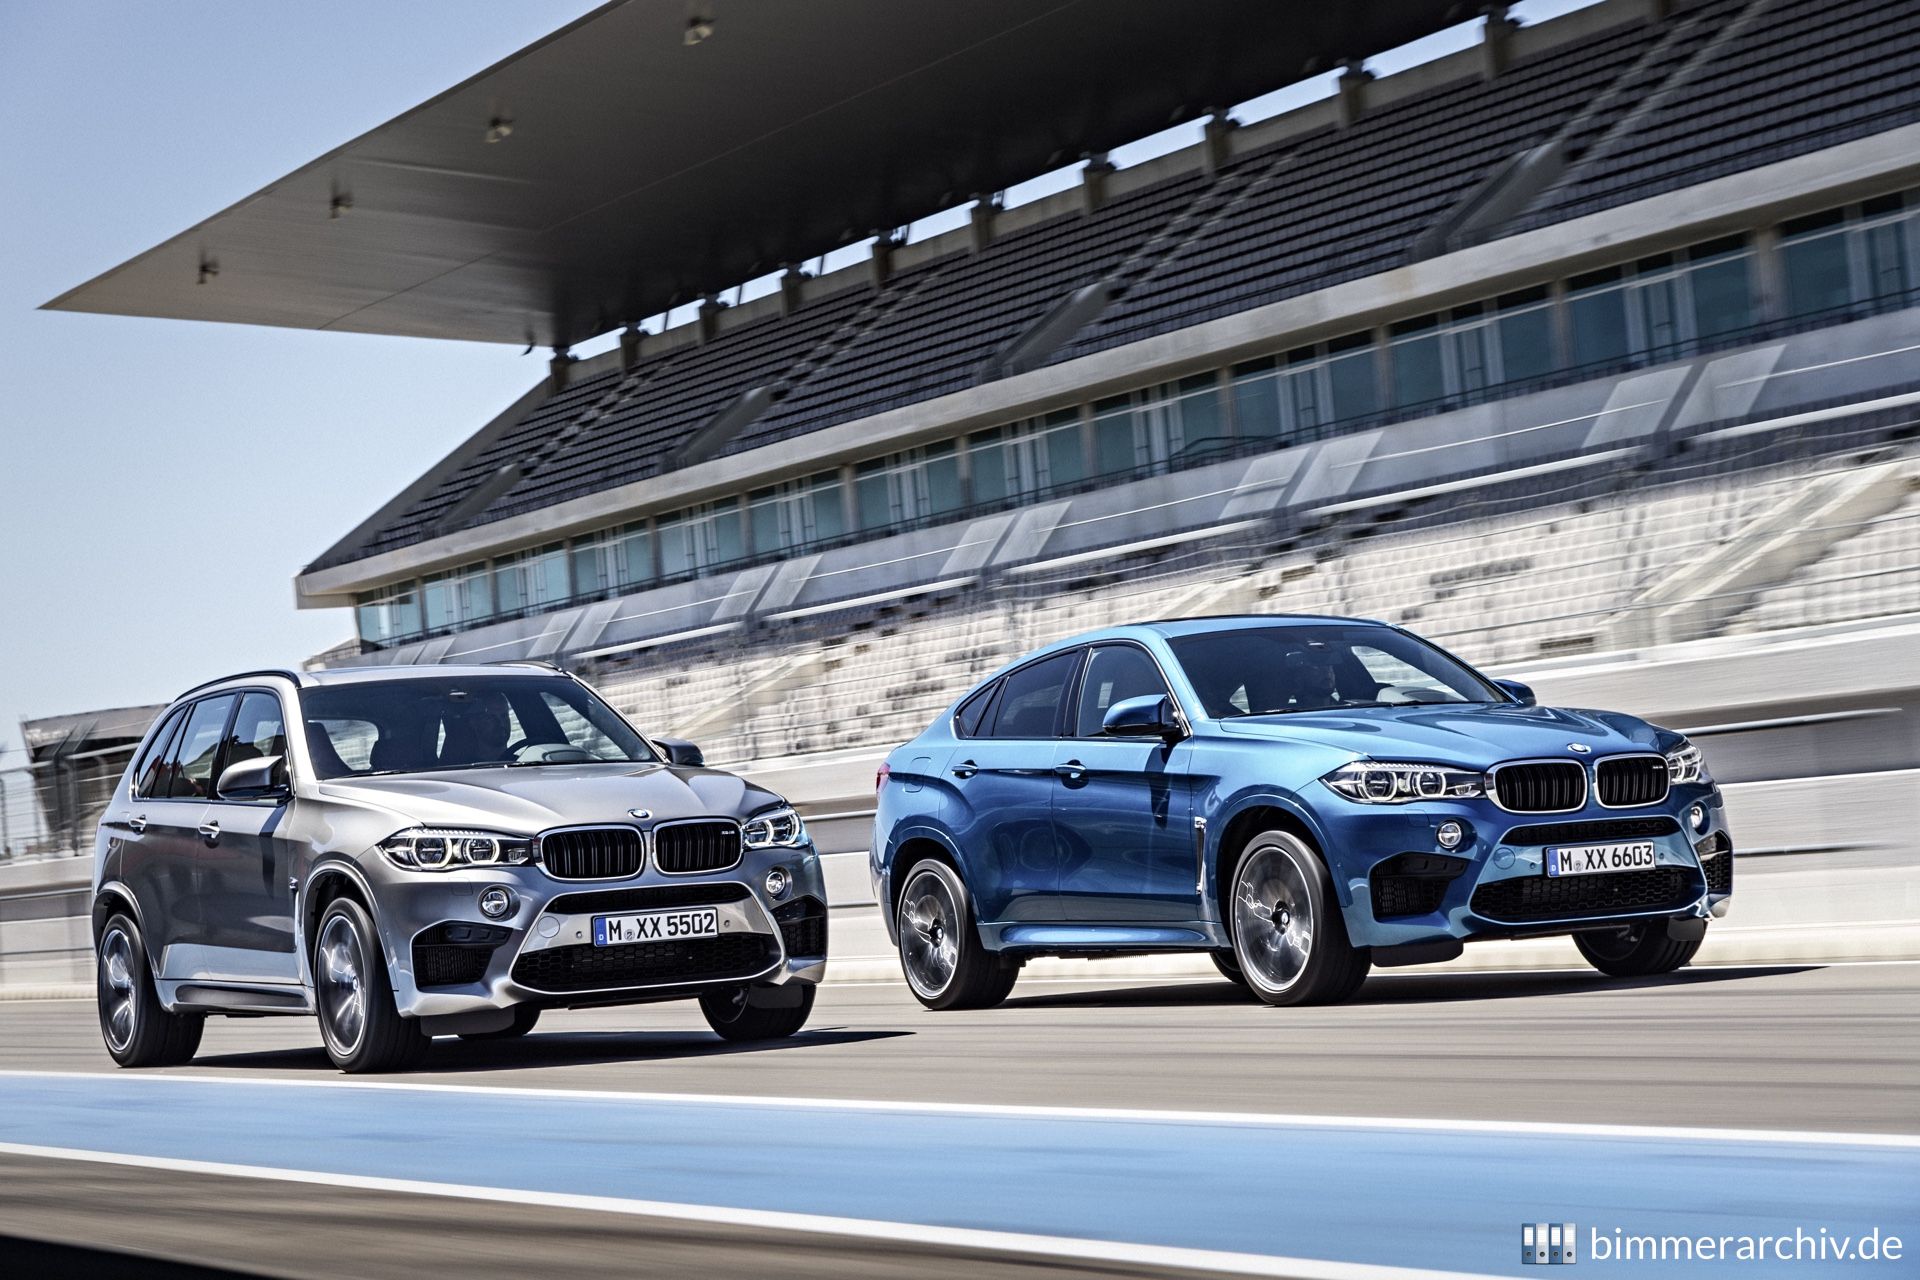 BMW X5 M and BMW X6 M